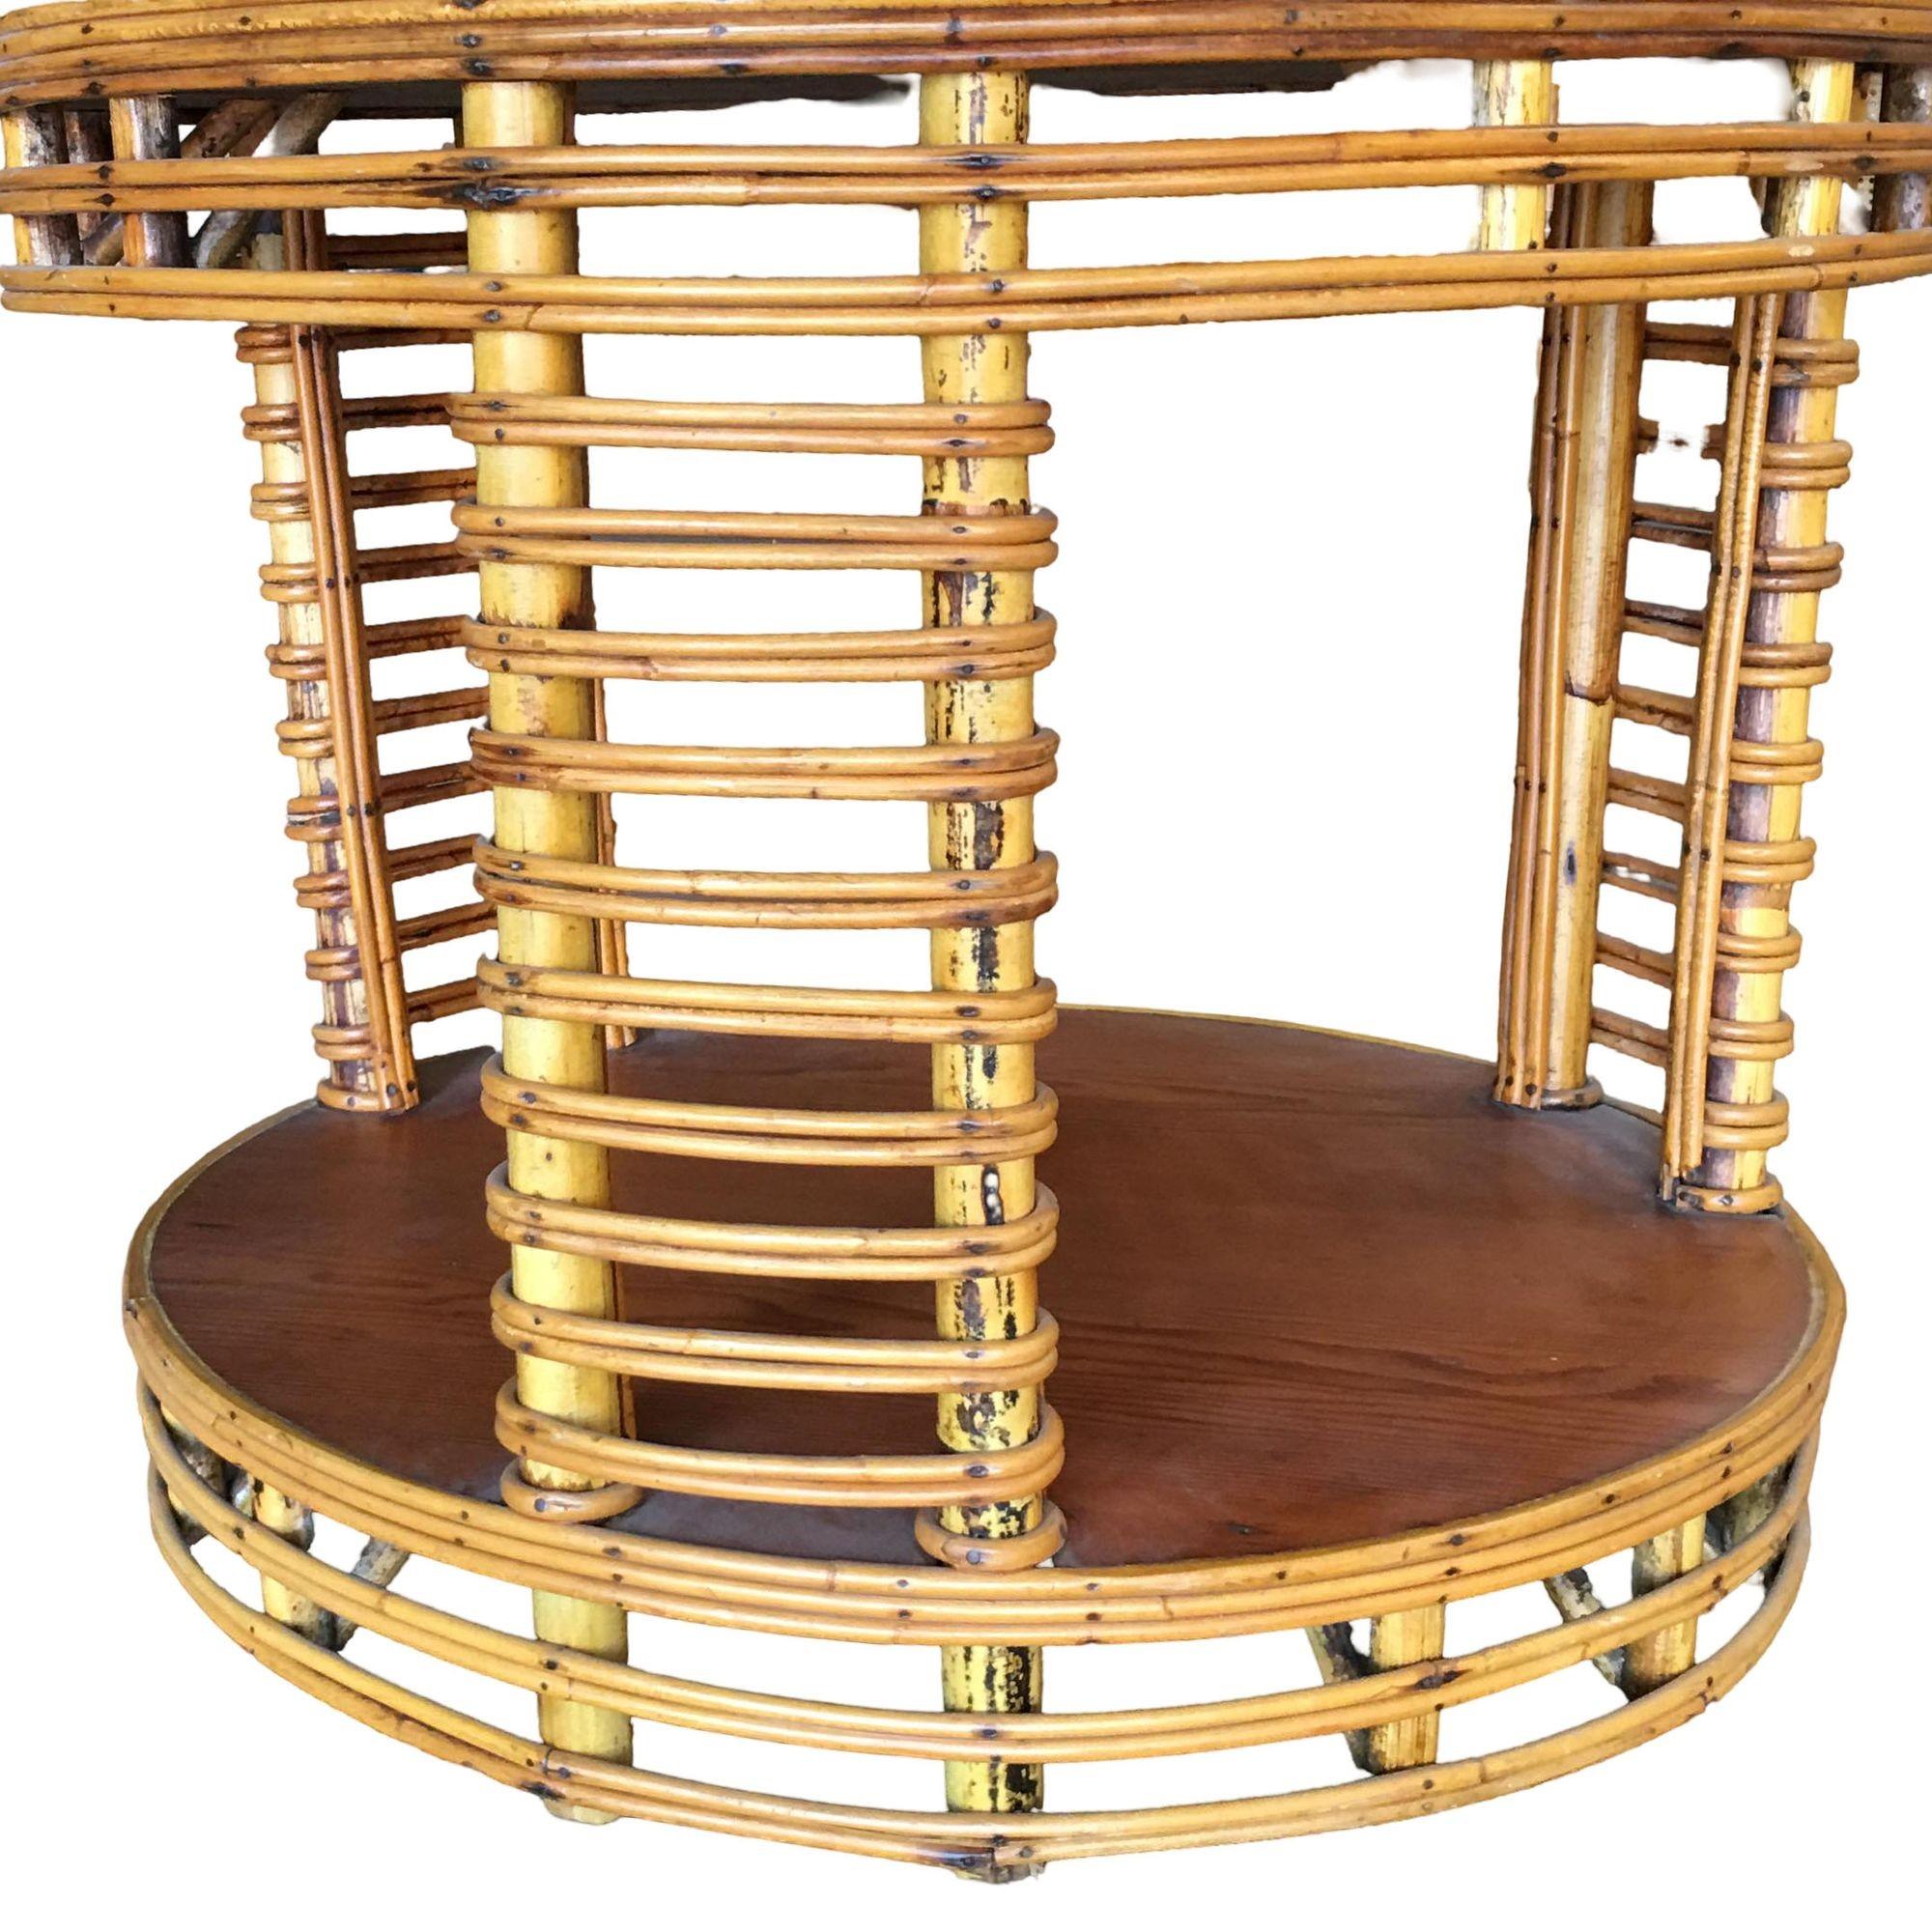 Two-Tier Round Stick Rattan Coffee Table with Mahogany Top In Excellent Condition For Sale In Van Nuys, CA